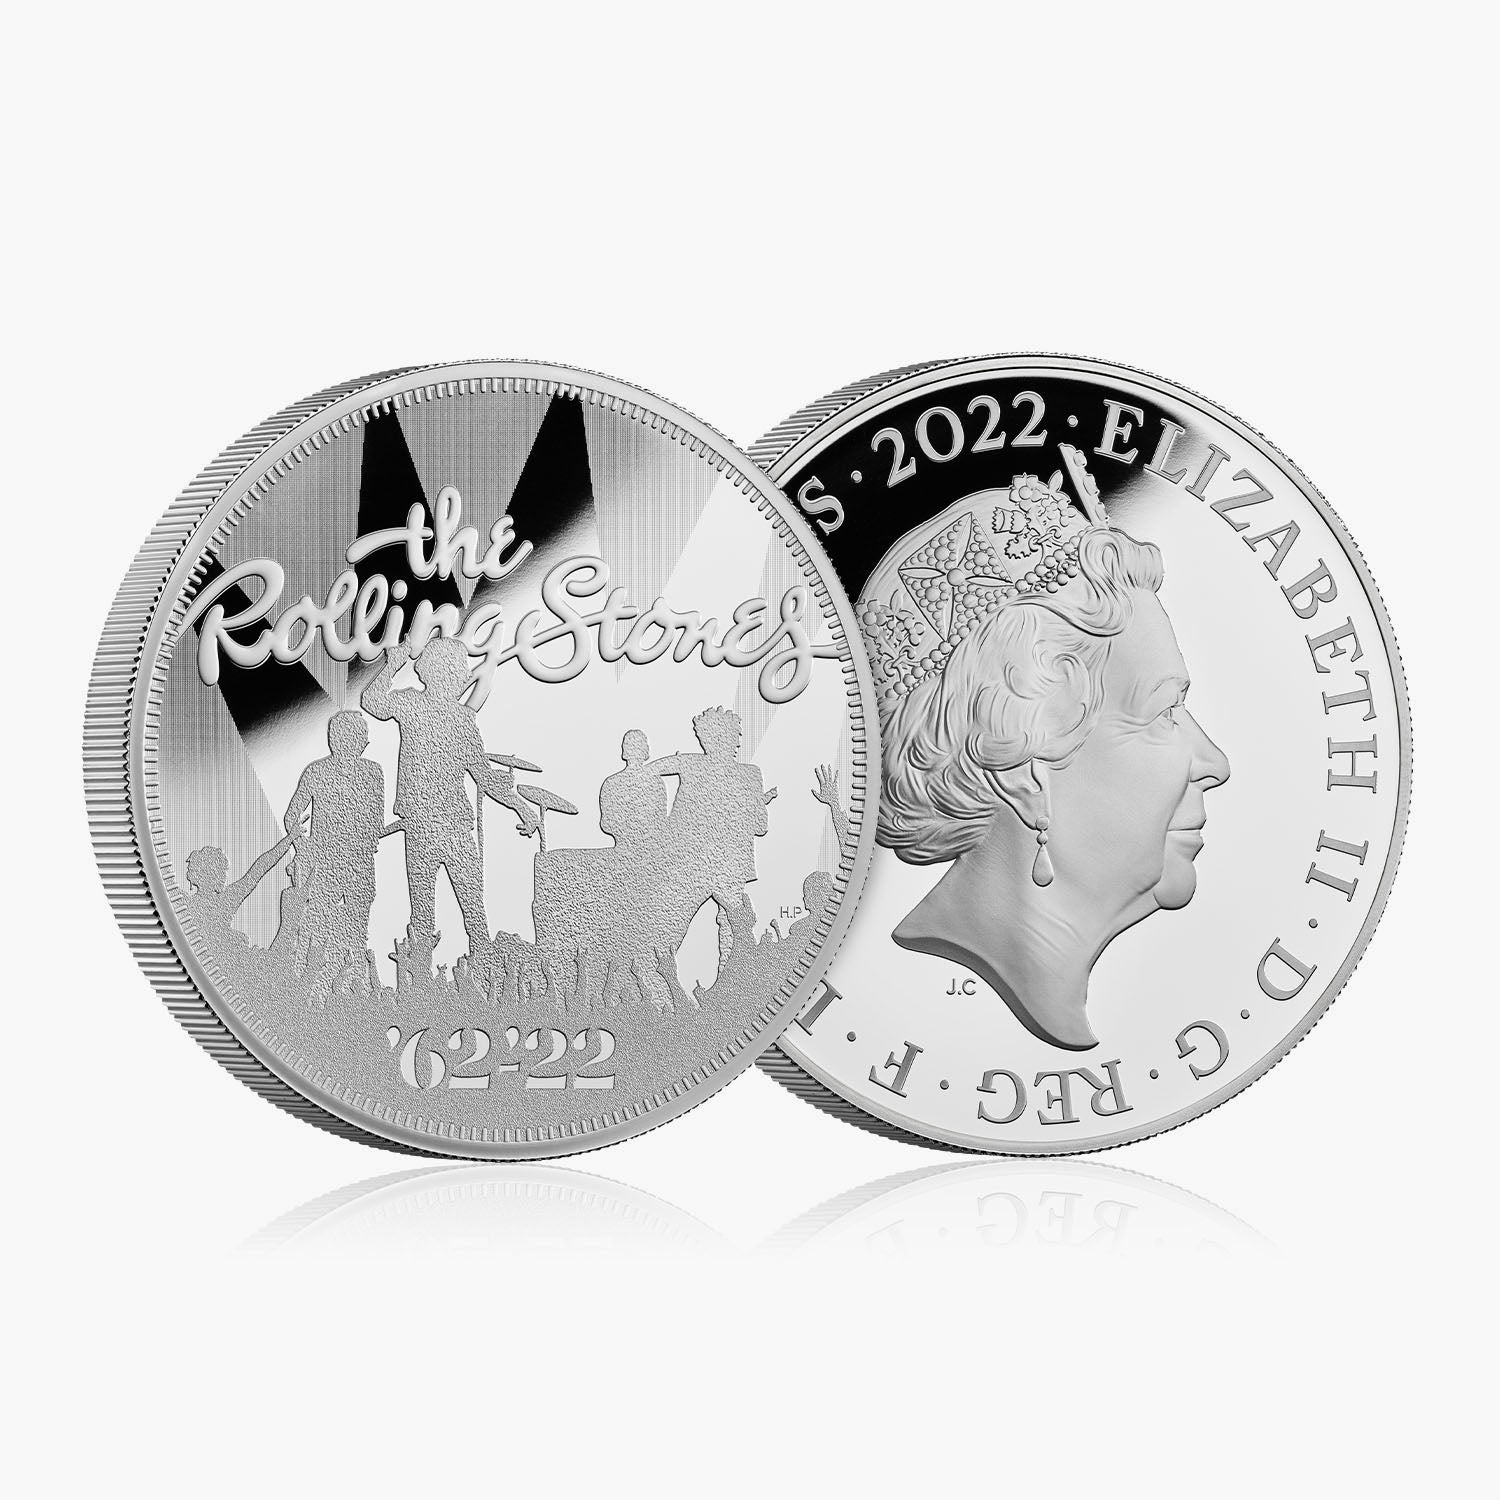 The Rolling Stones UK 2022 5oz Silver Proof Coin